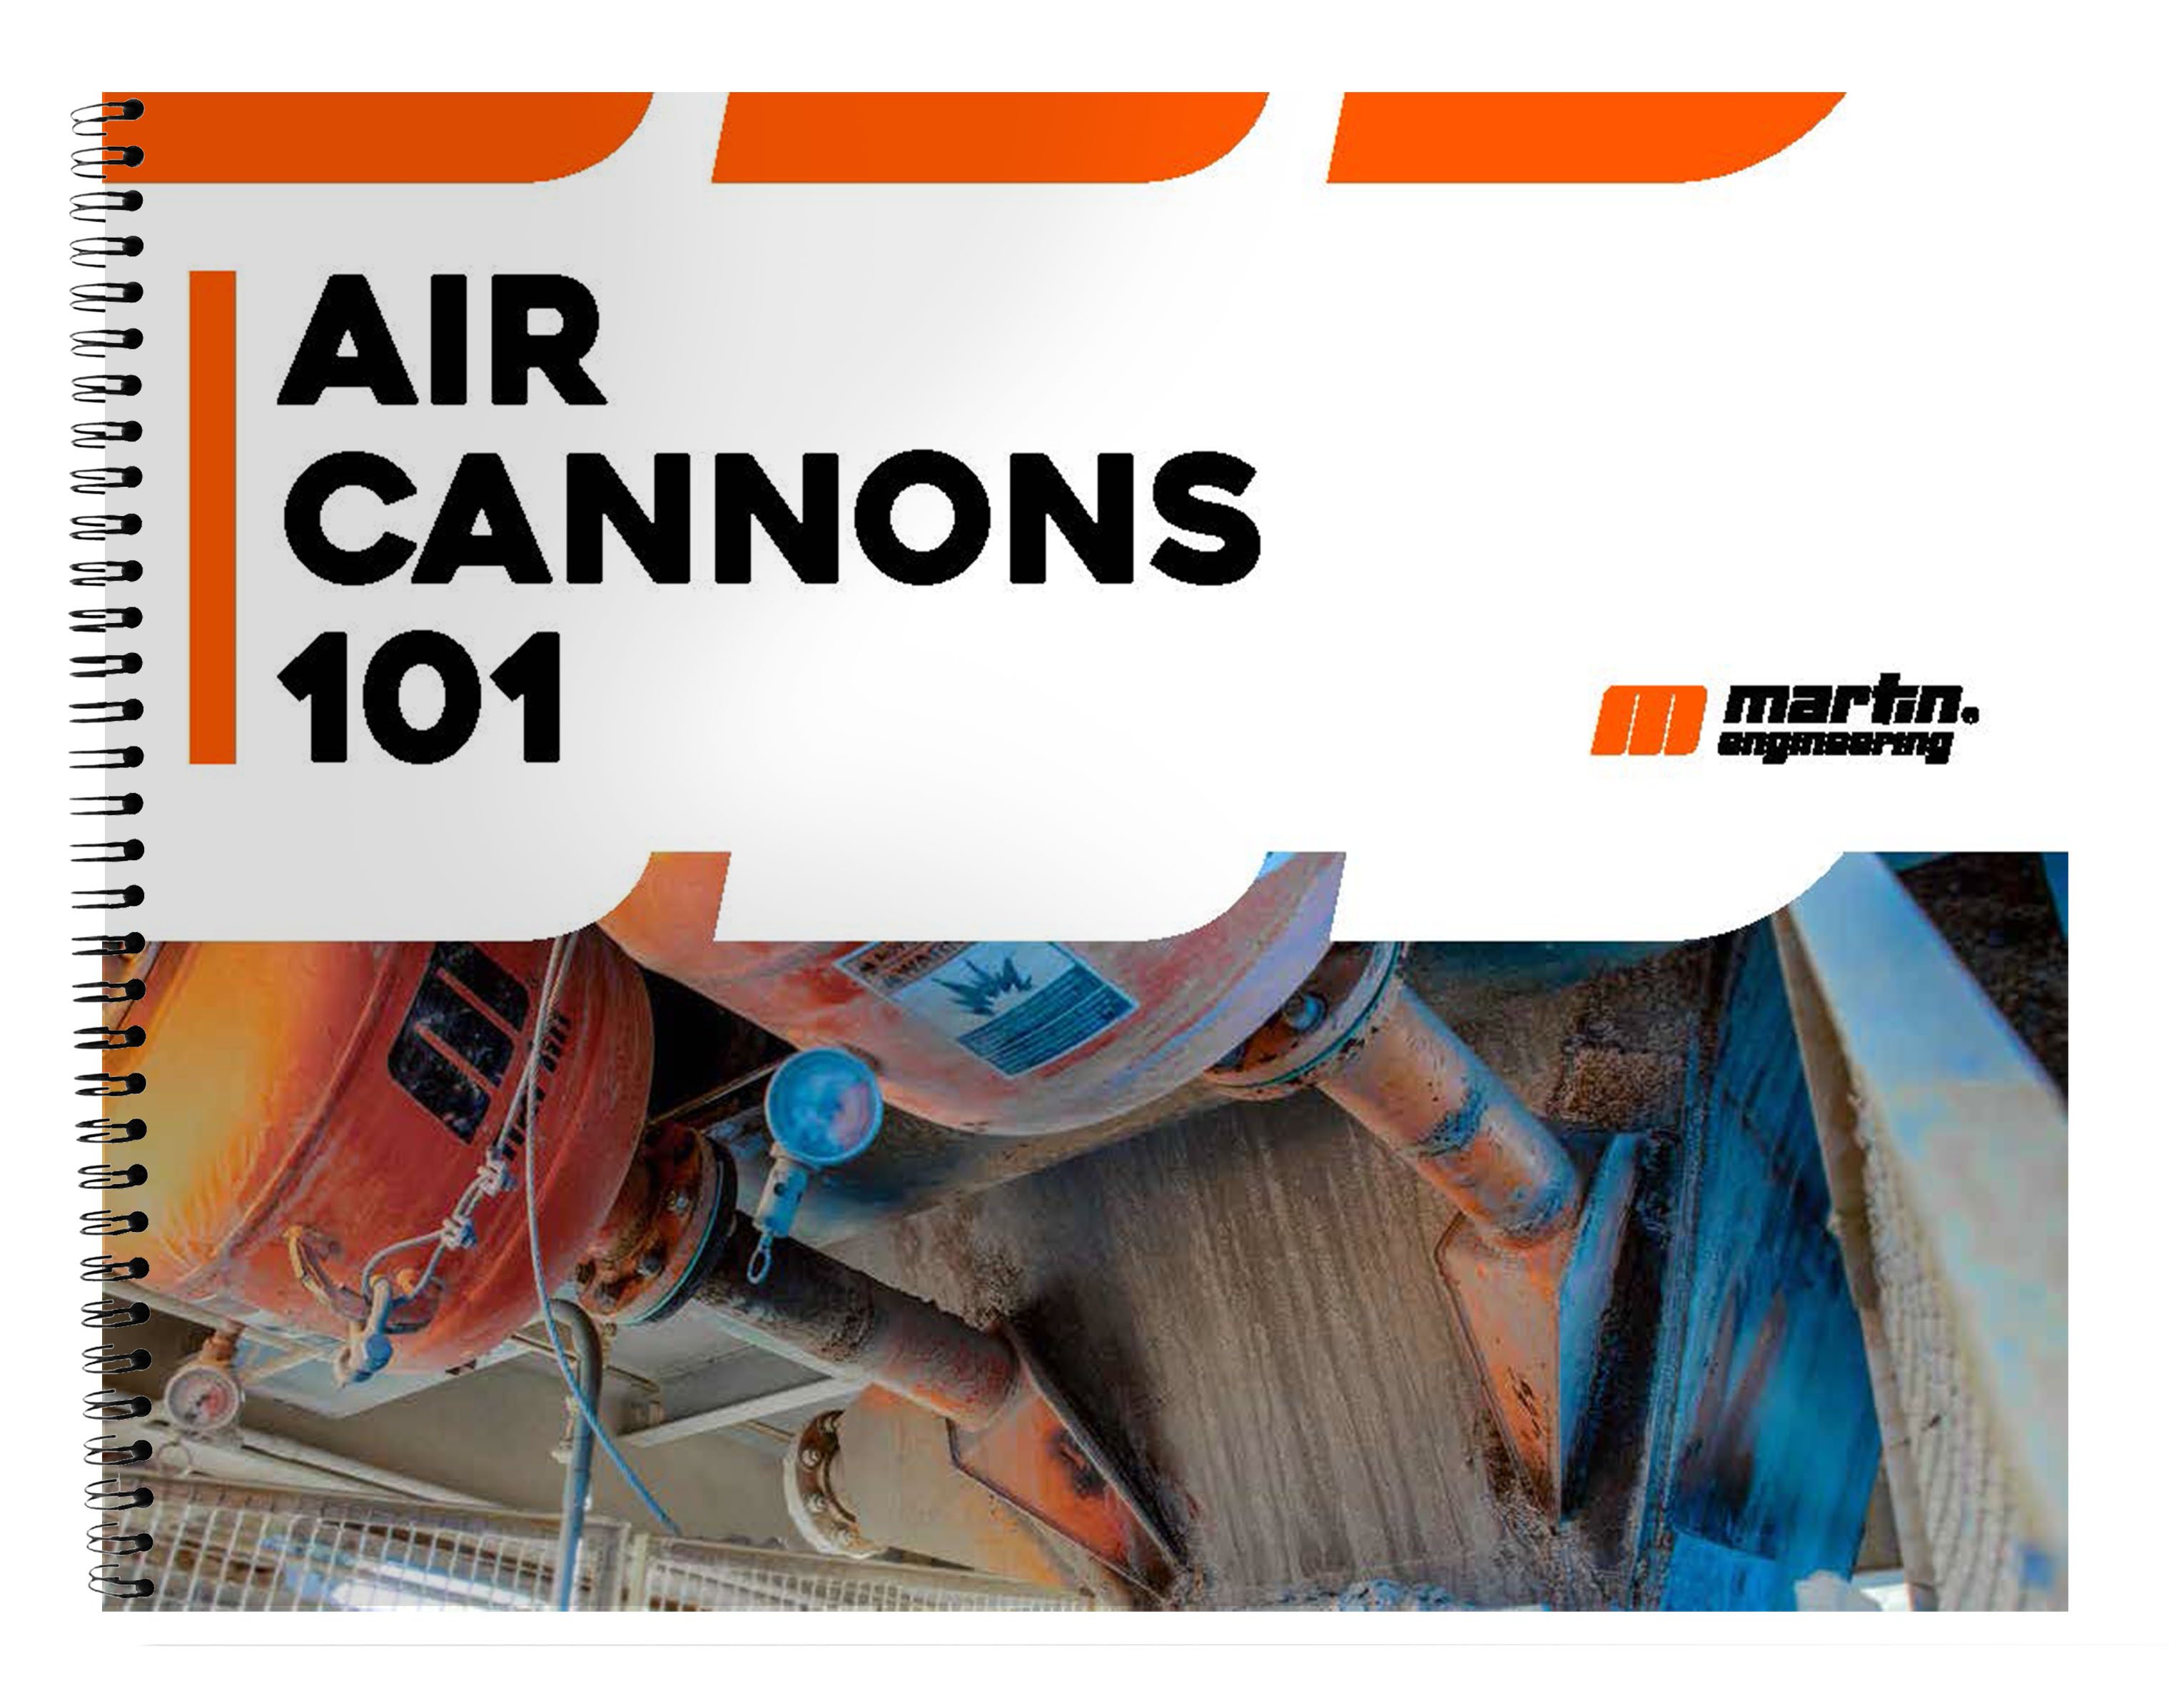 Air Cannon 101 Cover copy